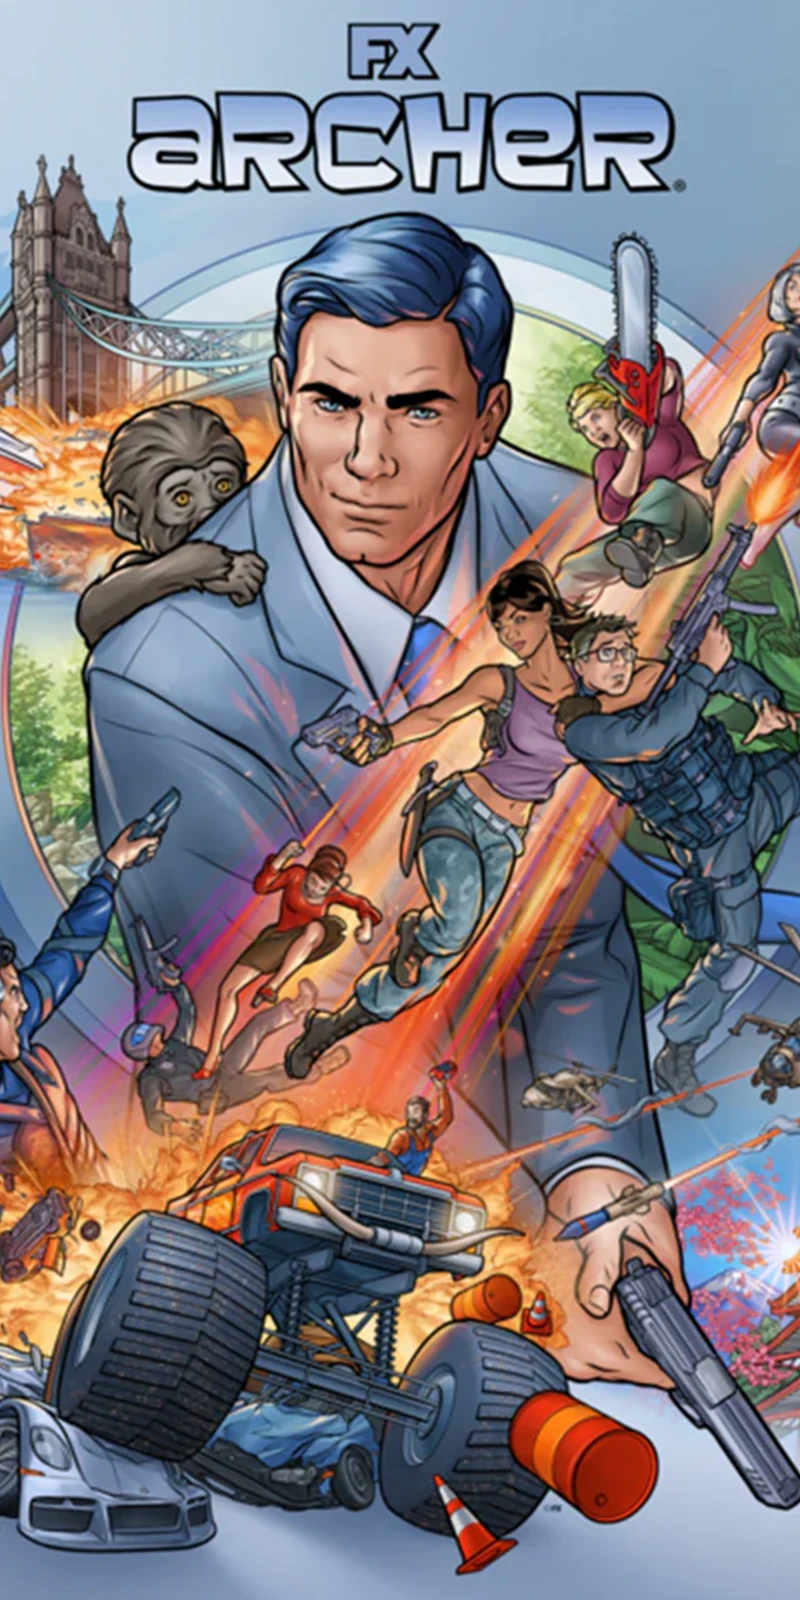 Dive into Archer's world! Reel spotlights stunning animated environments from FX's hit, crafted by Kansas City's Trinity Animation. Explore iconic locales, from luxe HQs to thrilling jungles, all in signature Archer style. Buckle up for action, humor, and animation brilliance!